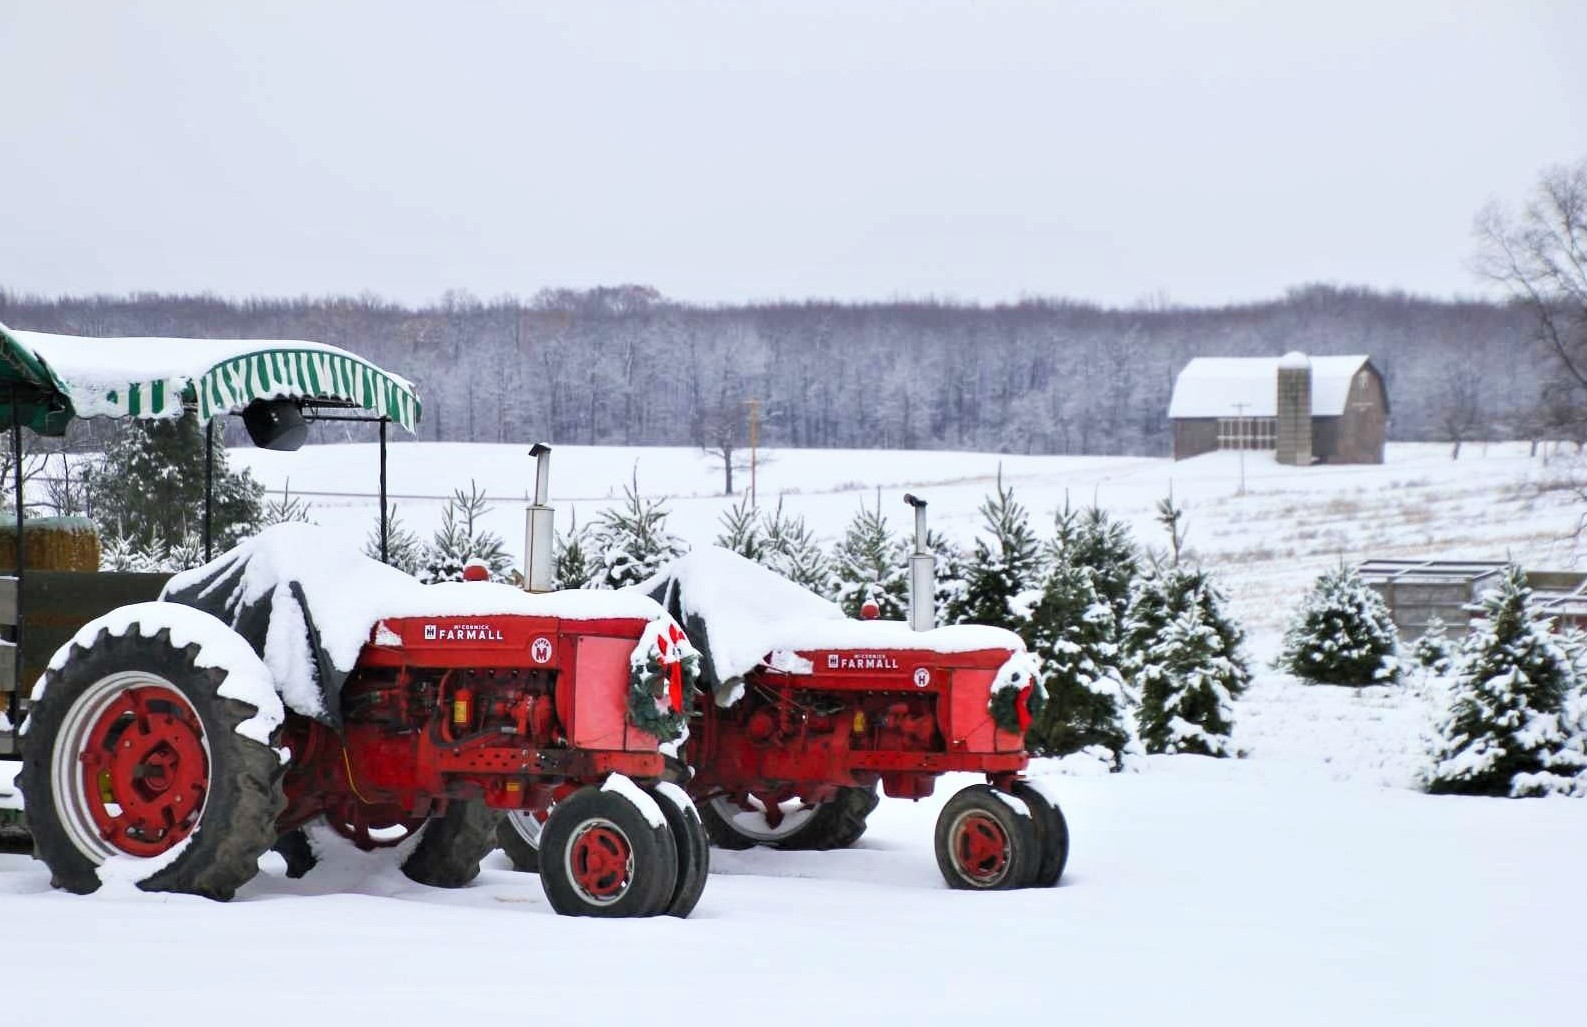 Two snow covered red tractors parked in a snowy lot